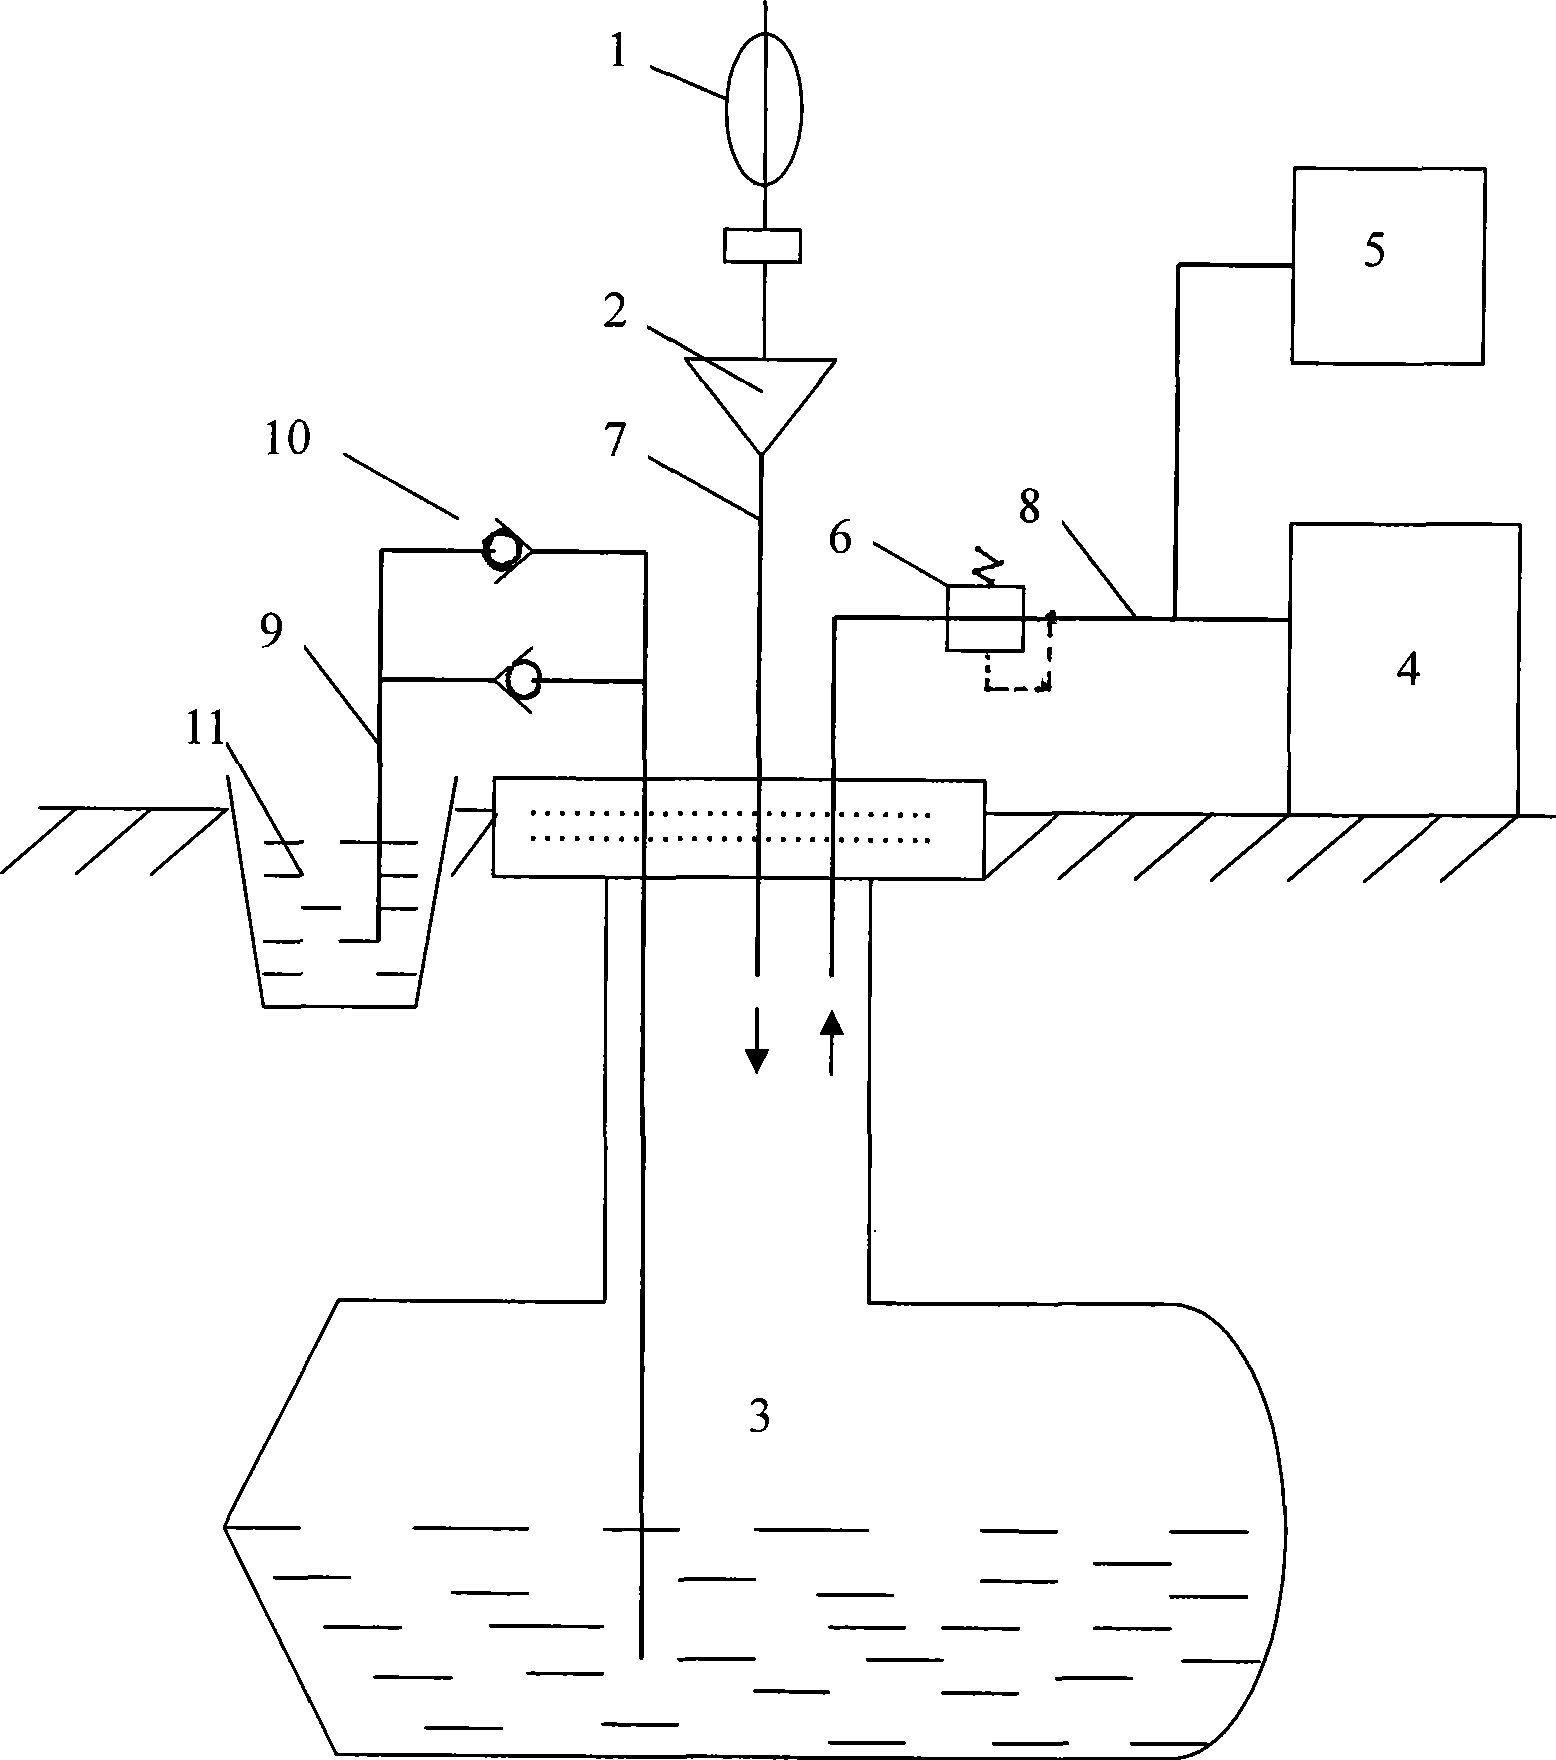 Wind energy storage and power generation apparatus